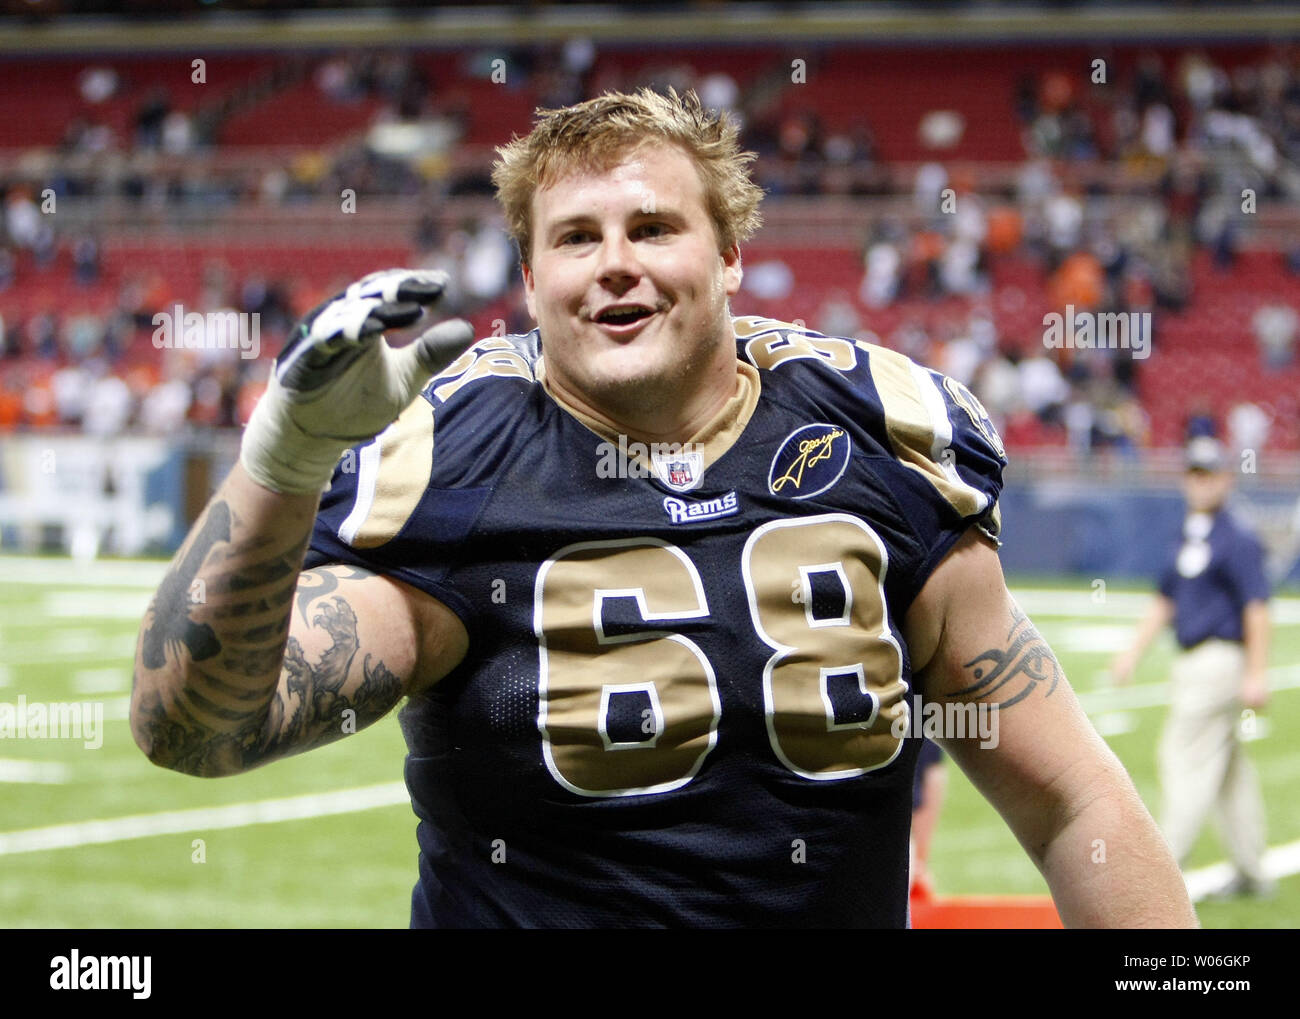 St. Louis Rams Richie Incognito, who was critical of fan support during the practice week, taunts fans while being booed as he leaves the field, after losing to the Chicago Bears, 27-3, at the Edward Jones Dome in St. Louis on November 23, 2008.   (UPI Photo/Bill Greenblatt) Stock Photo